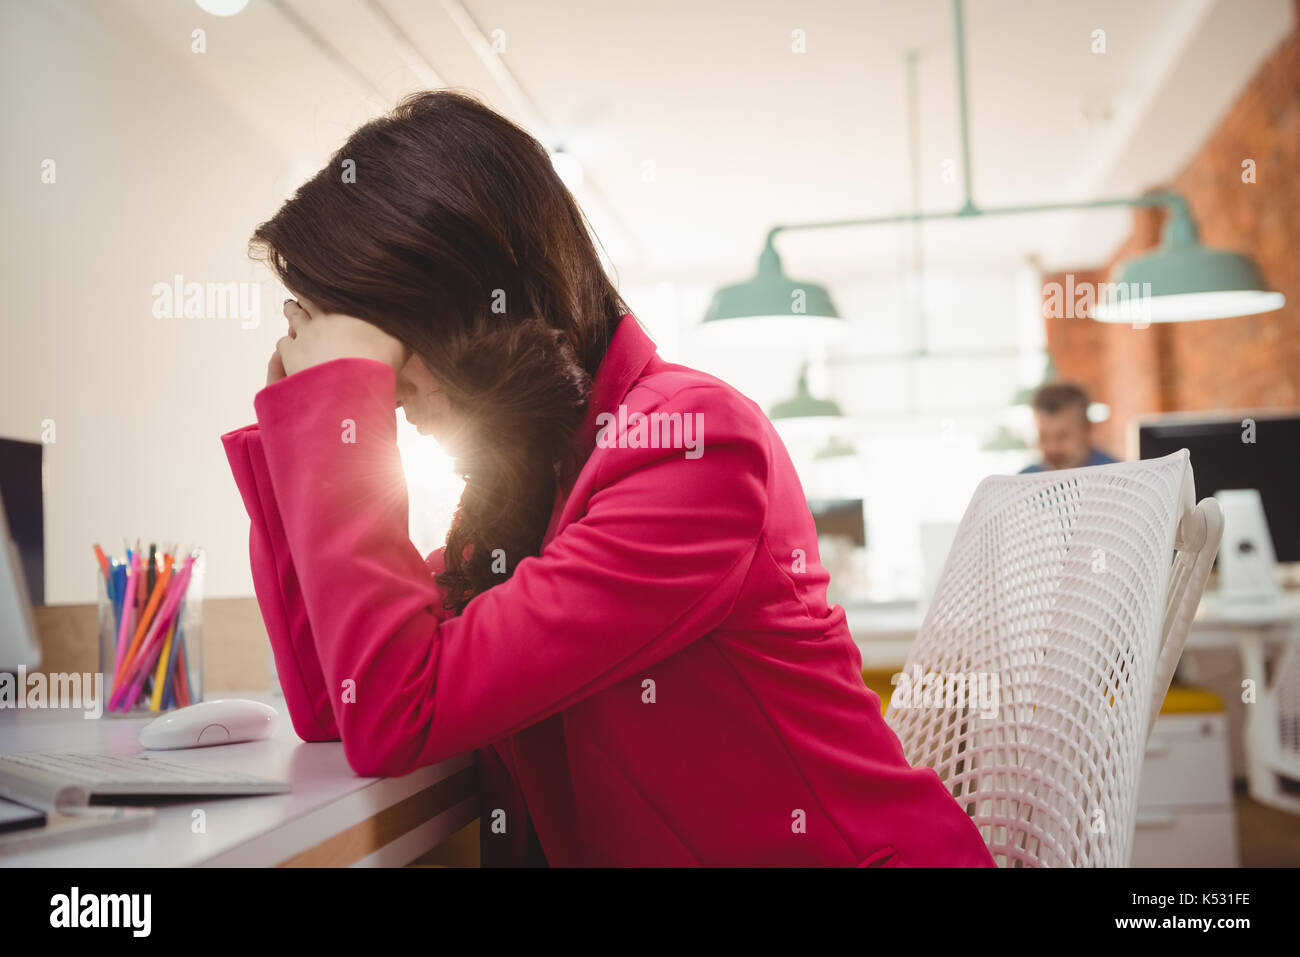 Tired female executive sitting with hands on forehead at desk in office Stock Photo